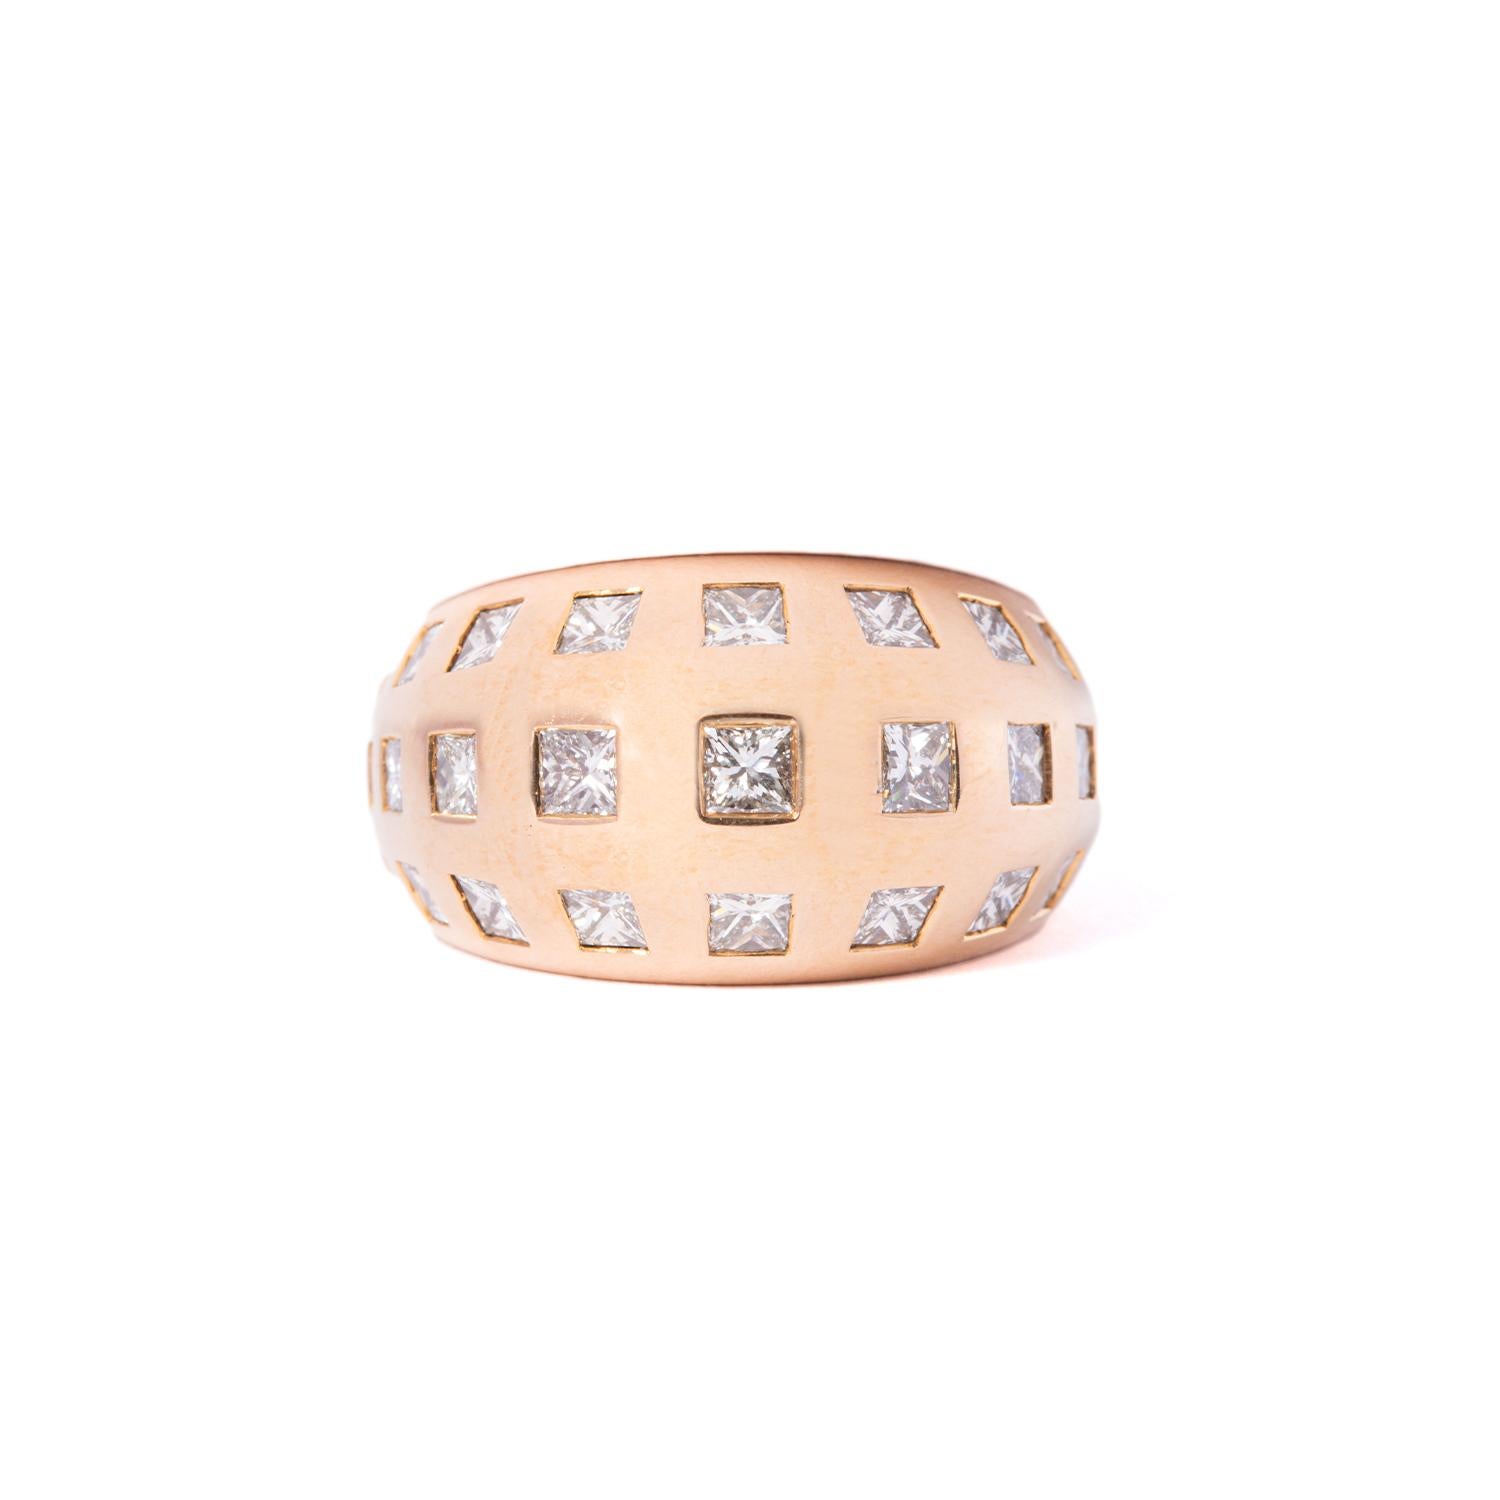 Vhernier  Ring in 18K yellow solid gold, with Diamonds carré cut 3,27
Size Europe 12 size US  6
Retail Price of this Ring new today would be close to 

Vhernier's roots can be traced back to the desire to create modern pieces of jewelry unlike any